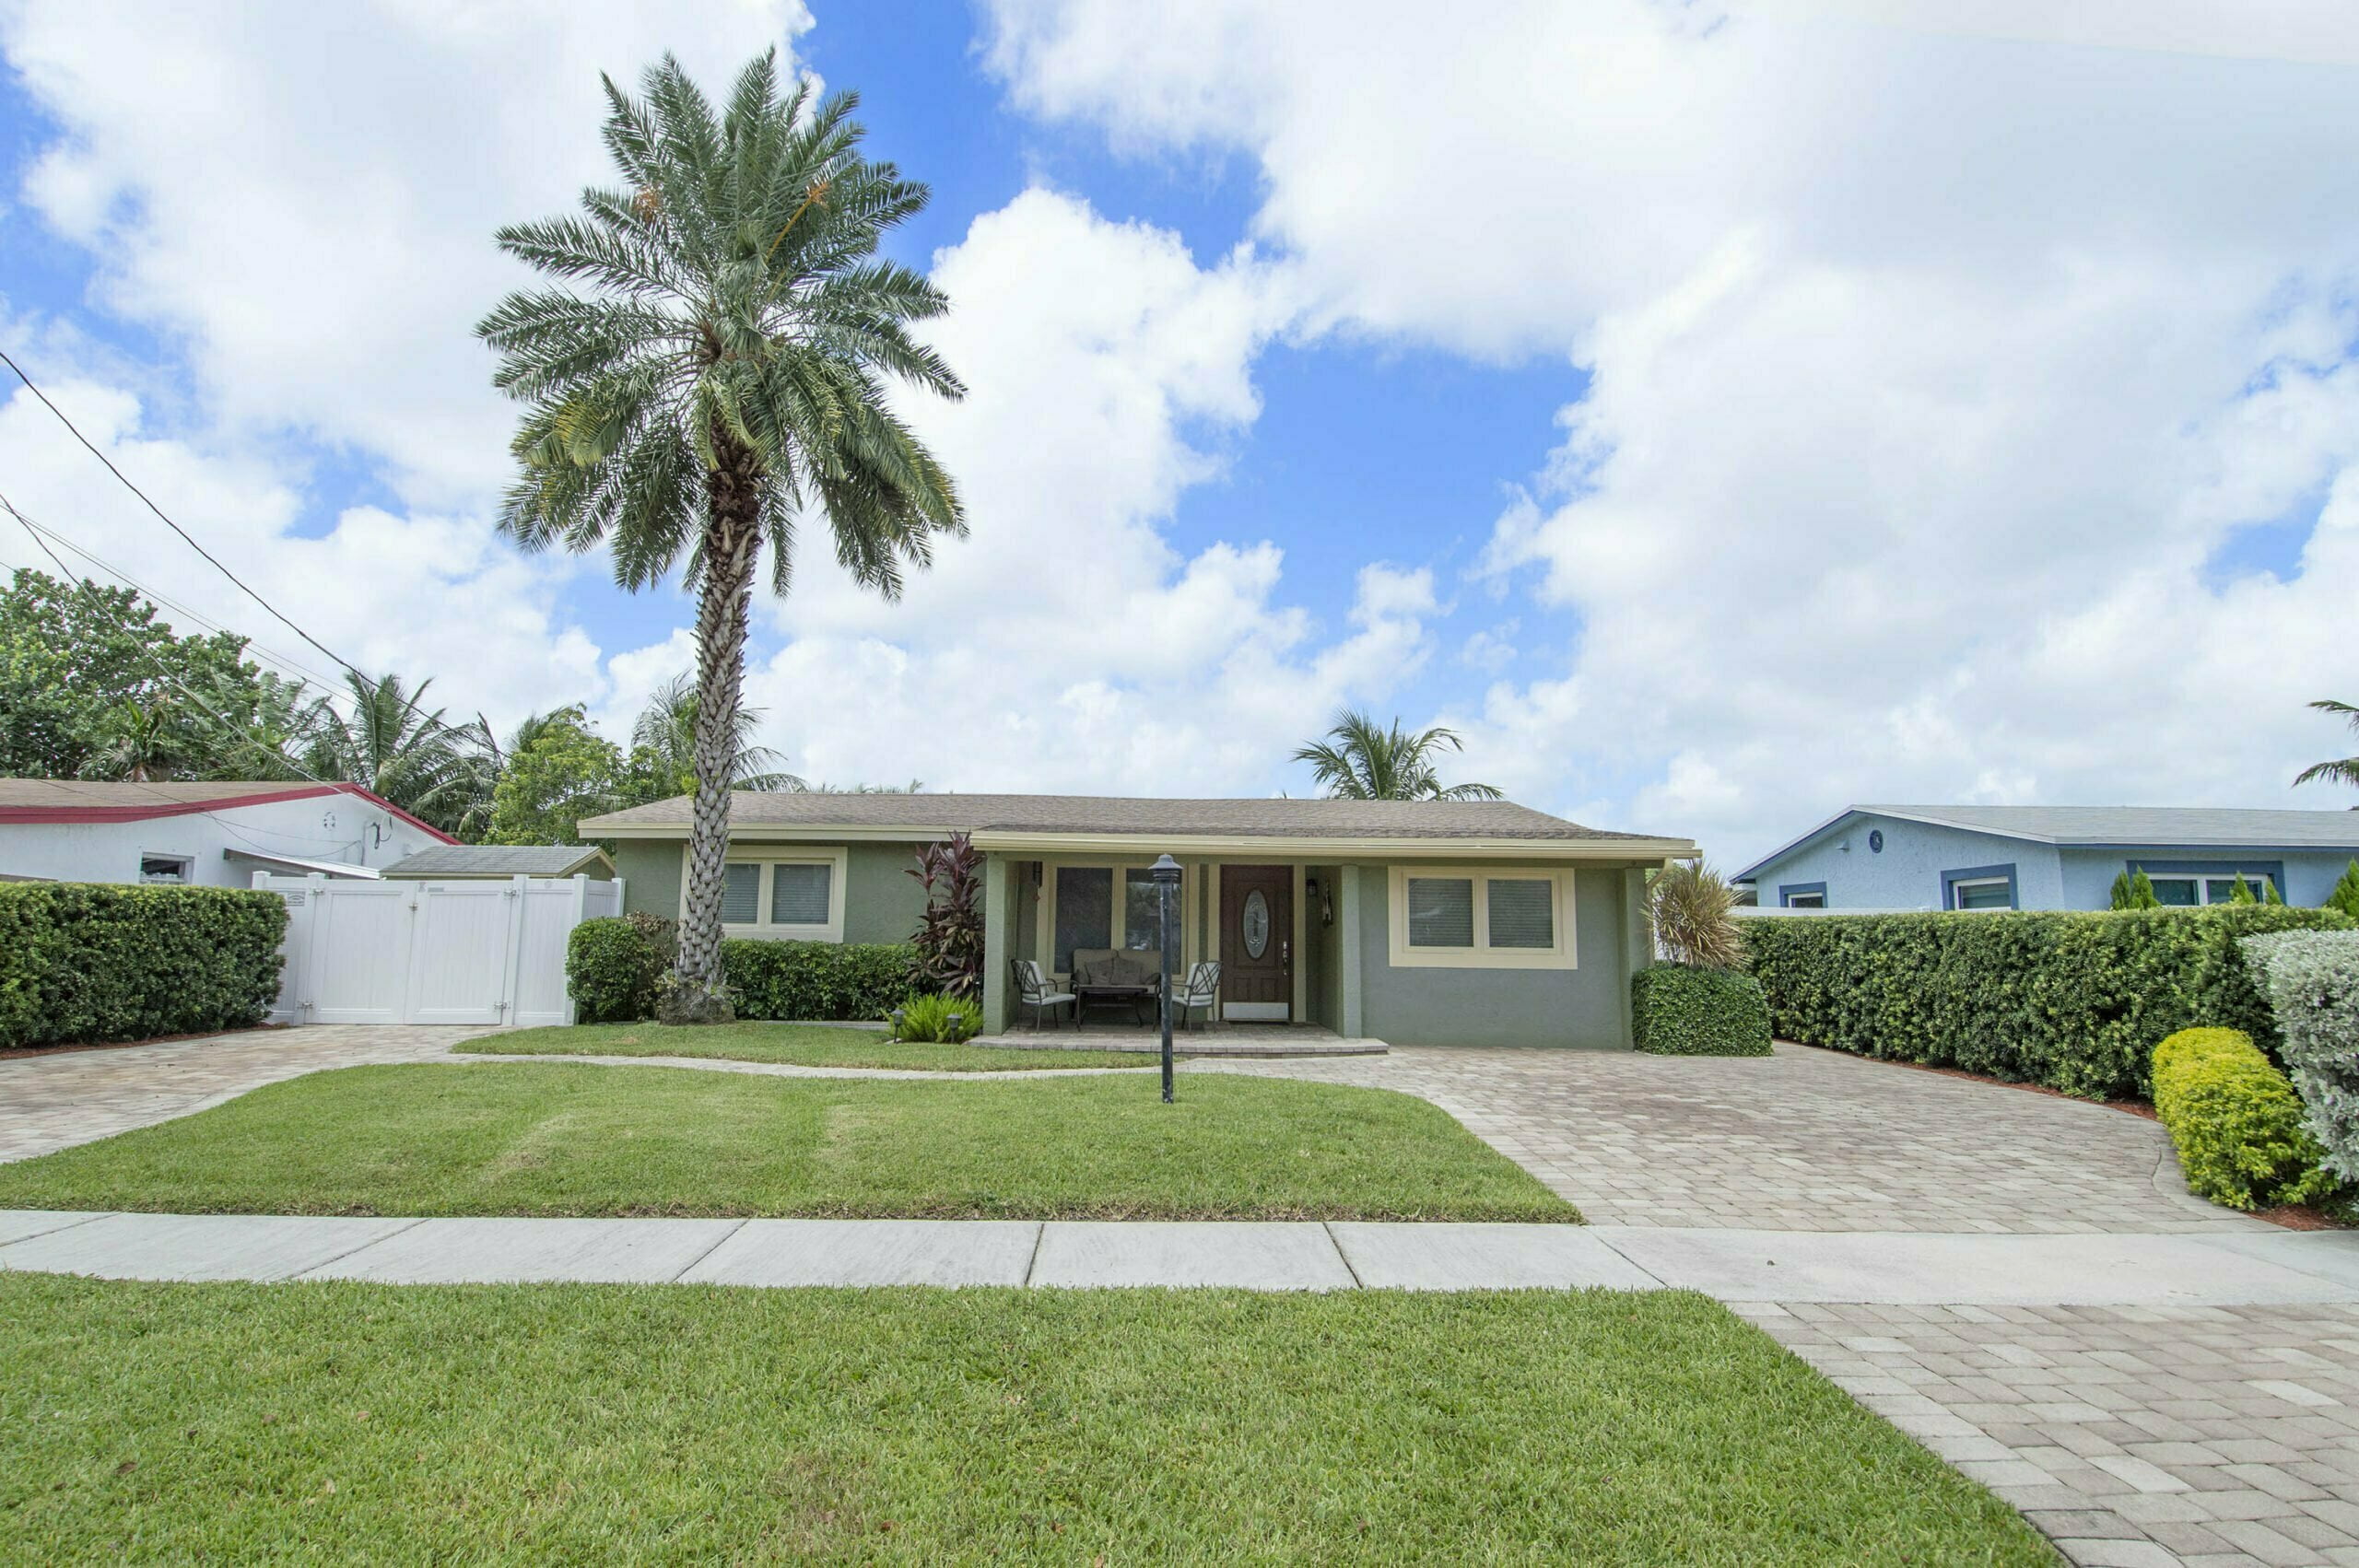 House Front for 4701 SW 34th Drive, Dania Beach, FL 33312 - © Flat Fee Florida Realty